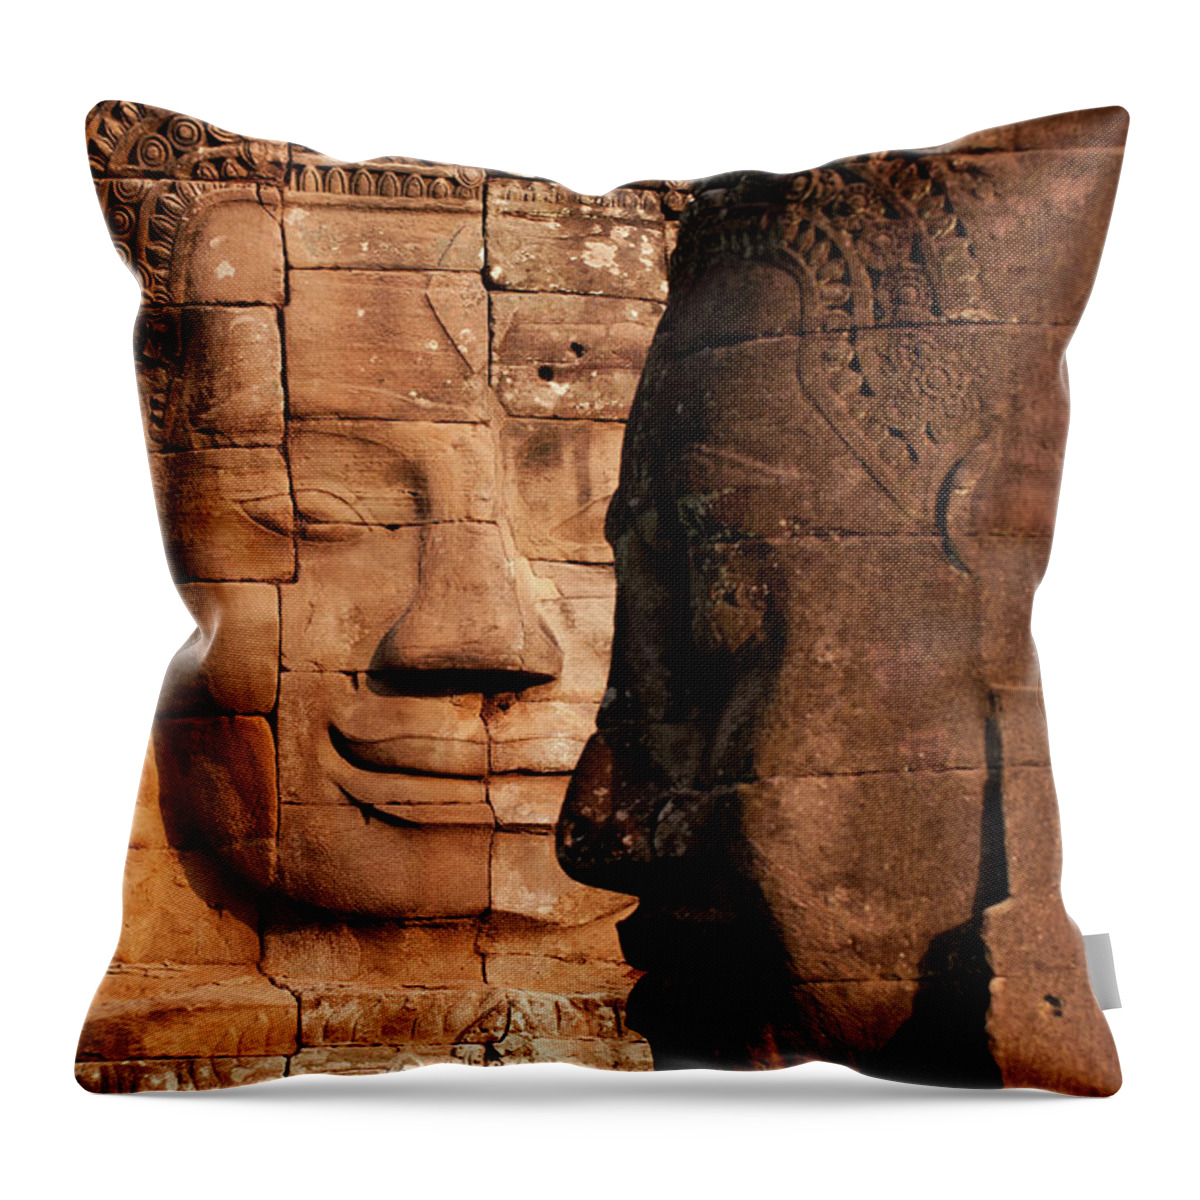 Cambodia Throw Pillow featuring the photograph Bayon Faces 02 by Rick Piper Photography